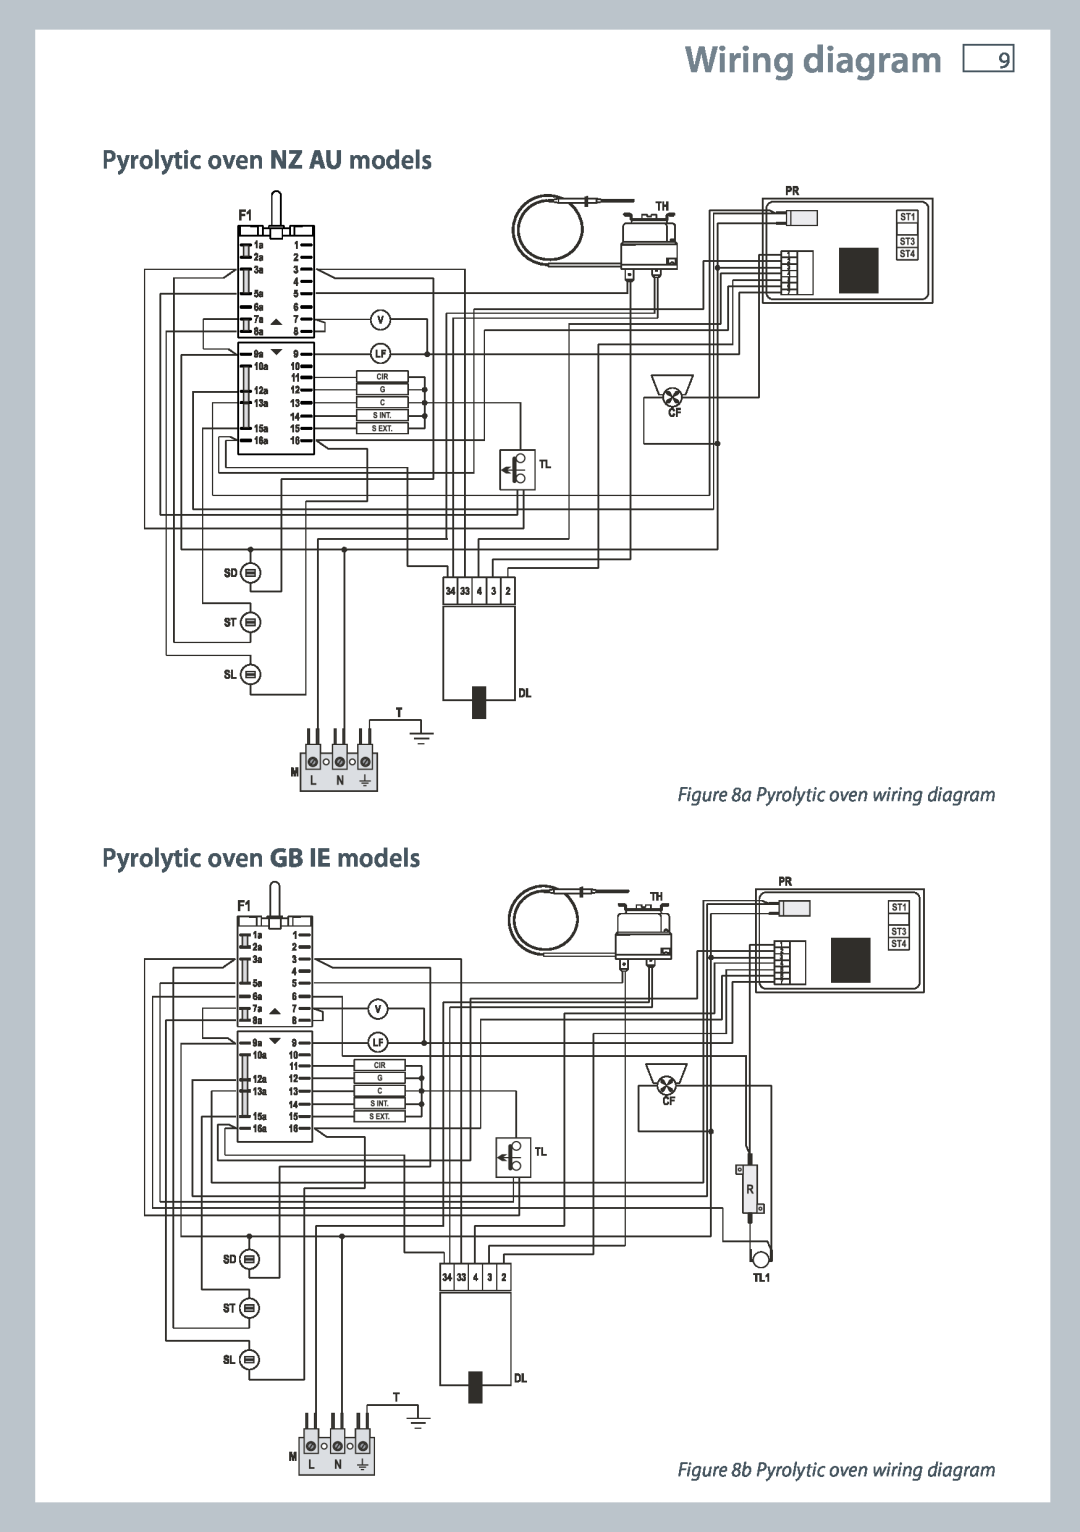 Fisher & Paykel OB60 installation instructions Wiring diagram, Pyrolytic oven NZ AU models, Pyrolytic oven GB IE models 